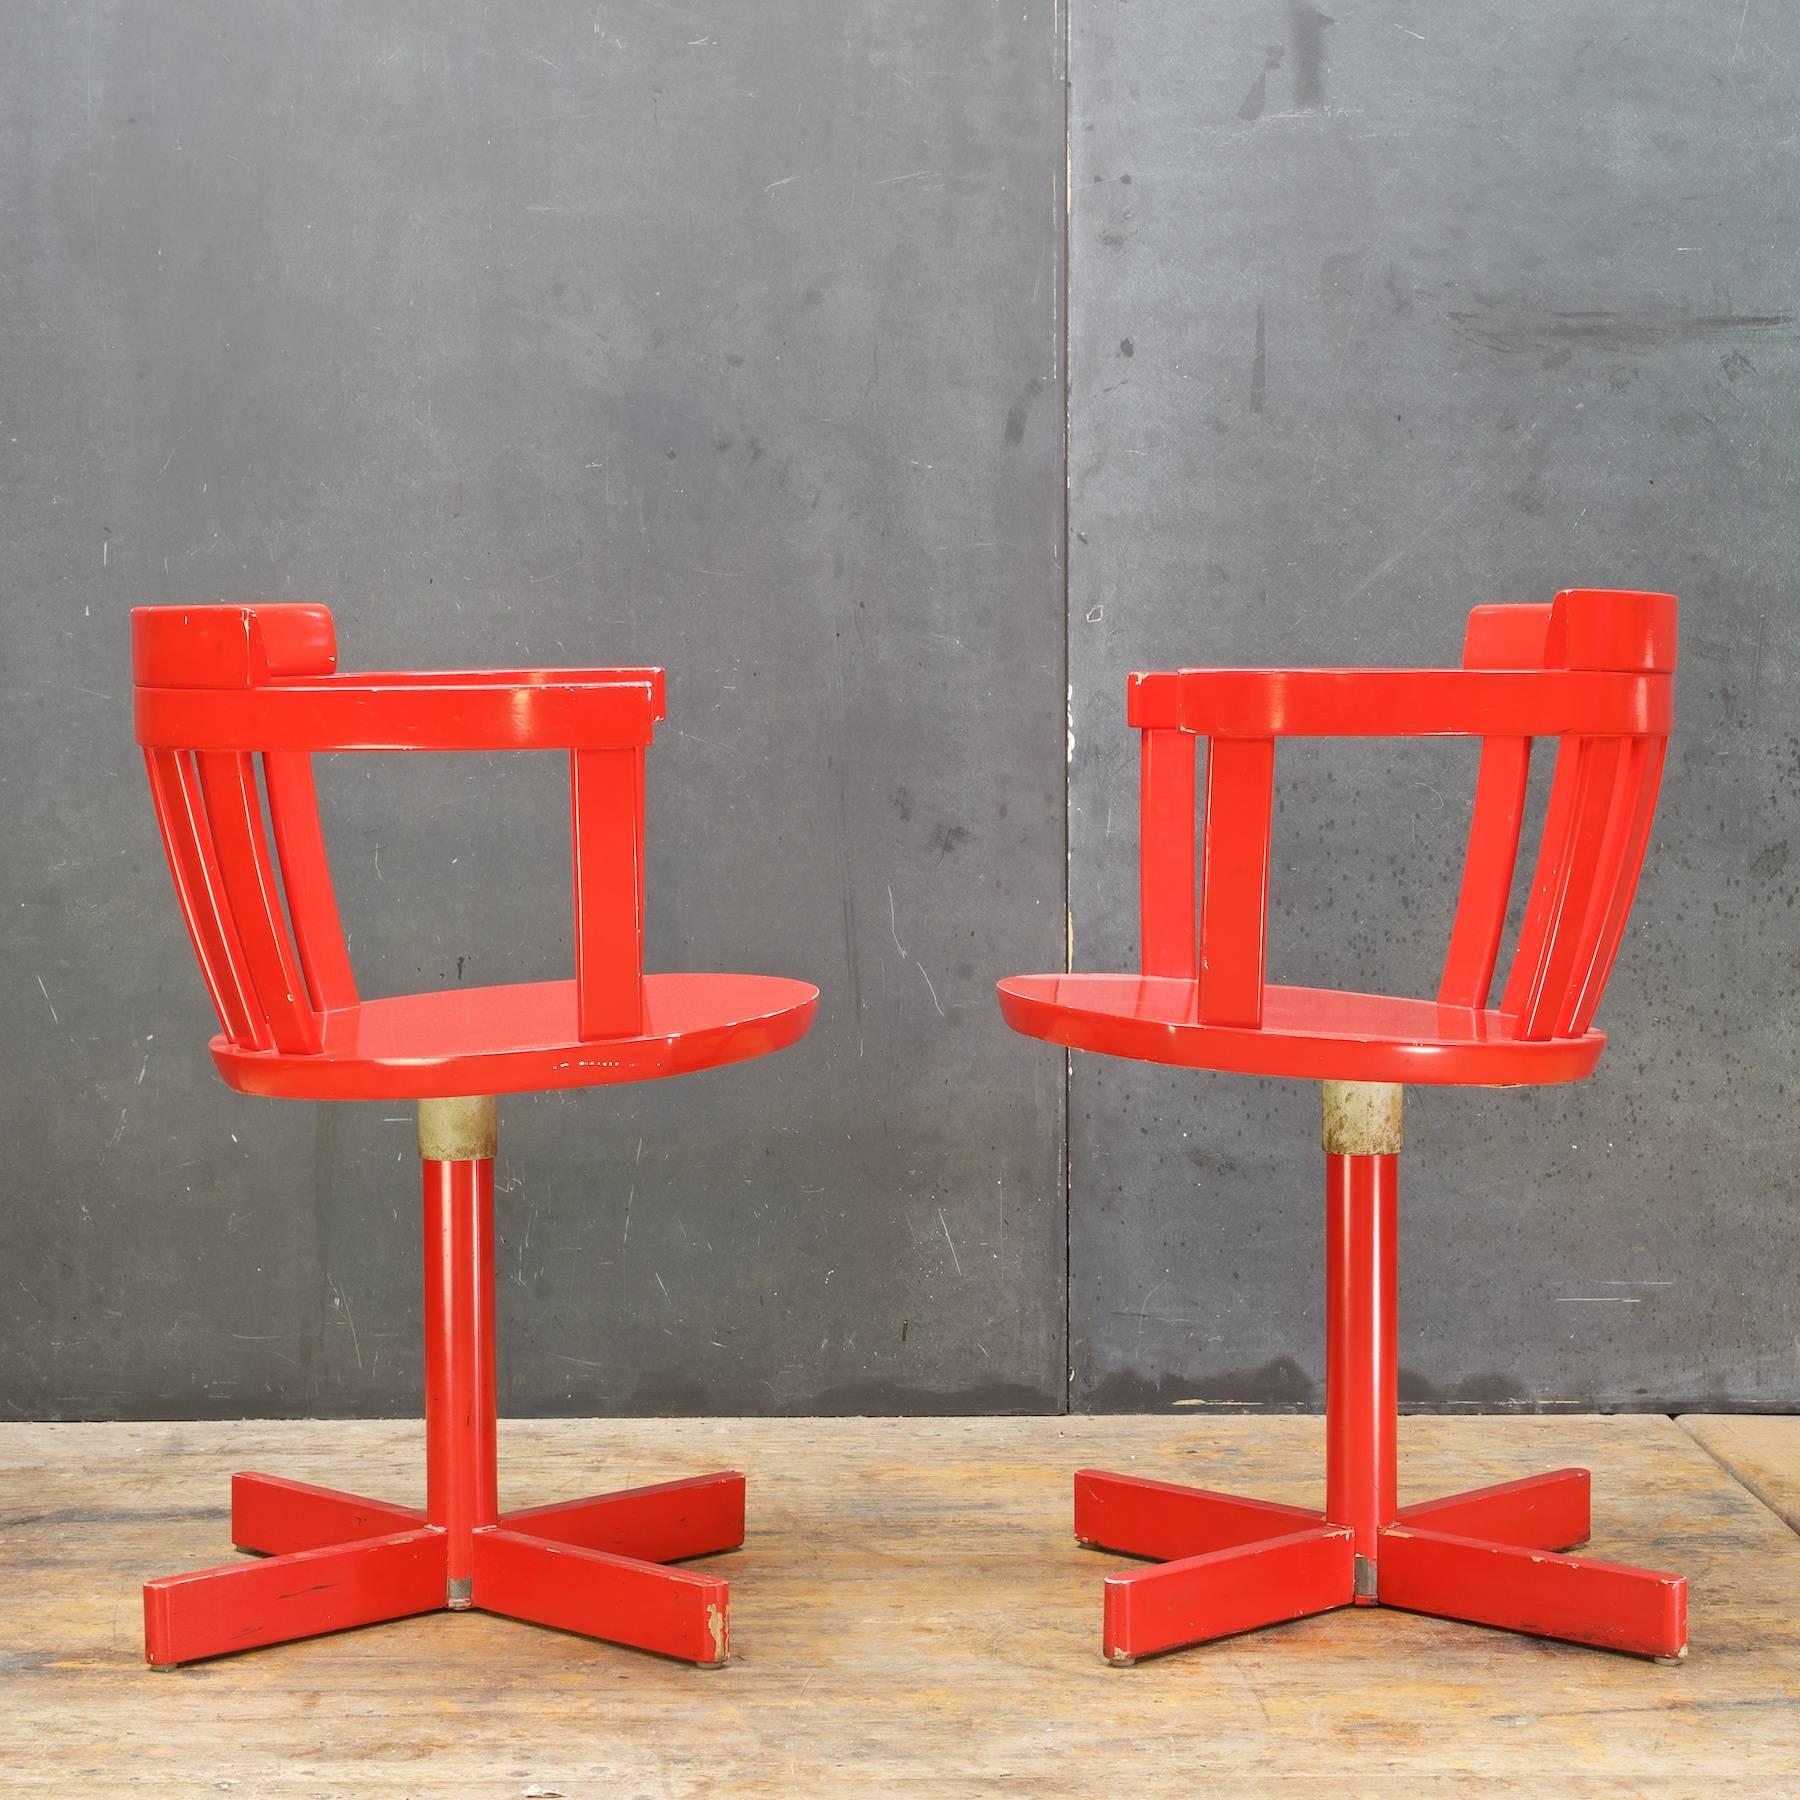 Pair of designed by Jan Hellberg and Sune Fromell for EdsbyVerken of Sweden, circa 1966.

Measure: W 18 x D 16 x seat H 18 x arm H 23 x back H 25 in.